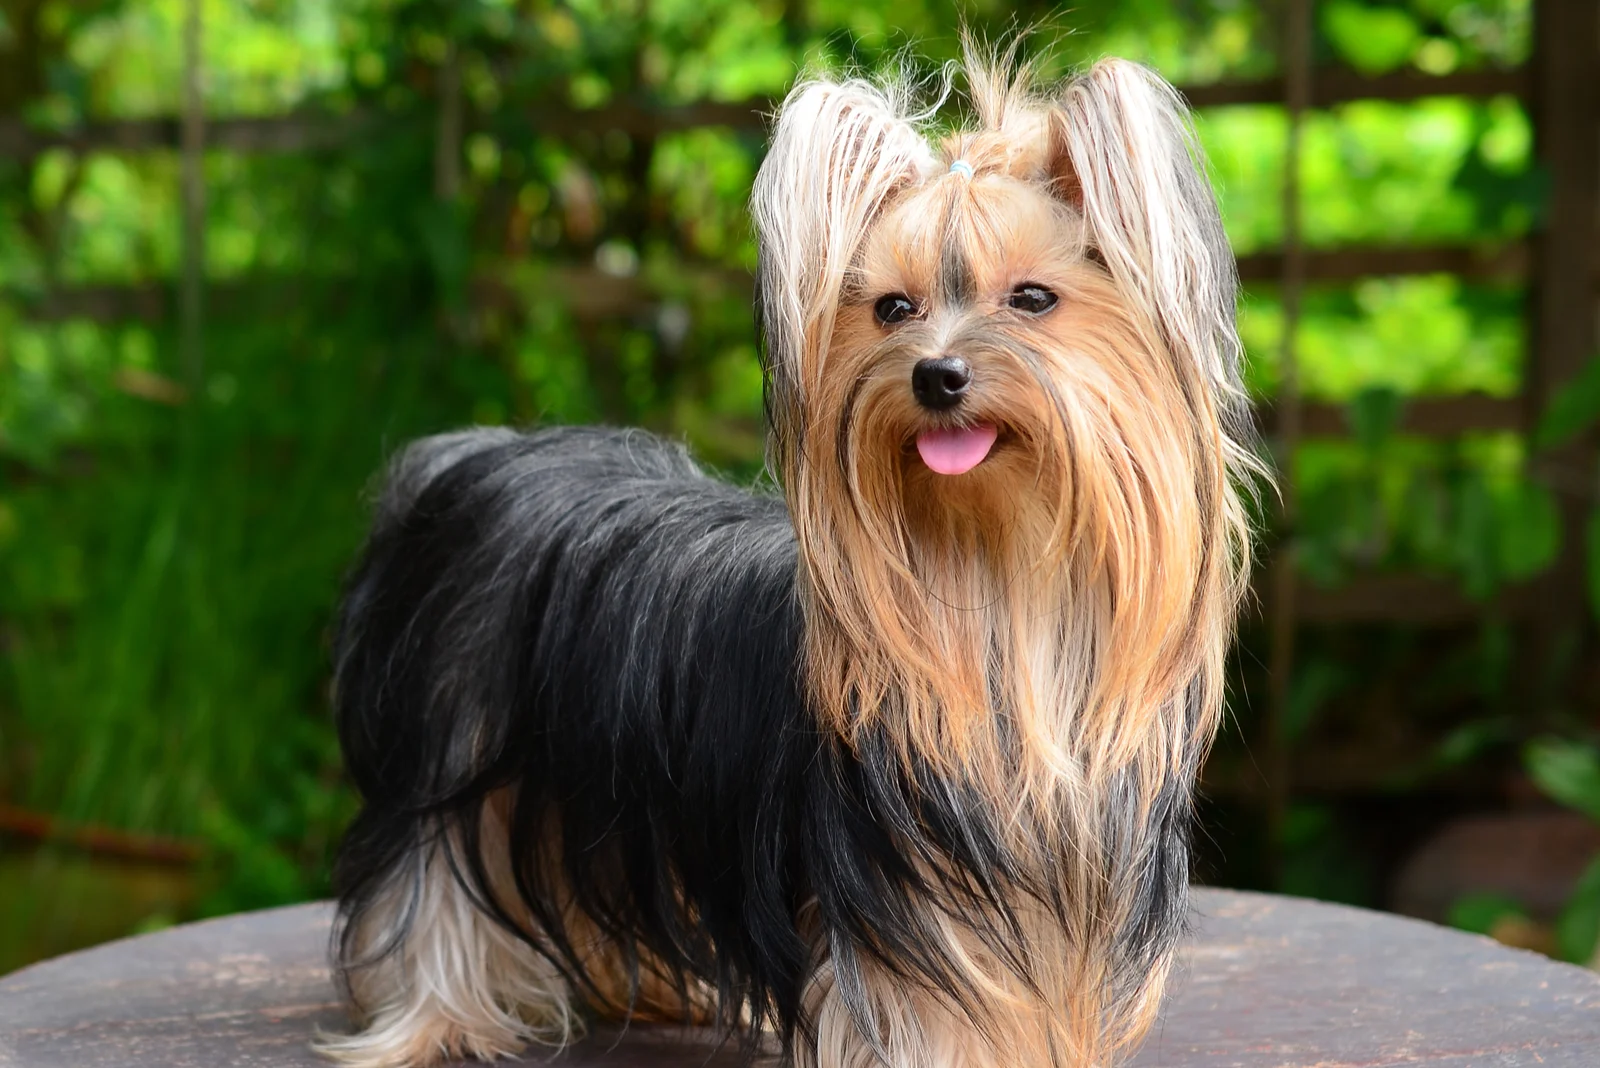 The long-haired Yorkshire Terrier stands and stares ahead